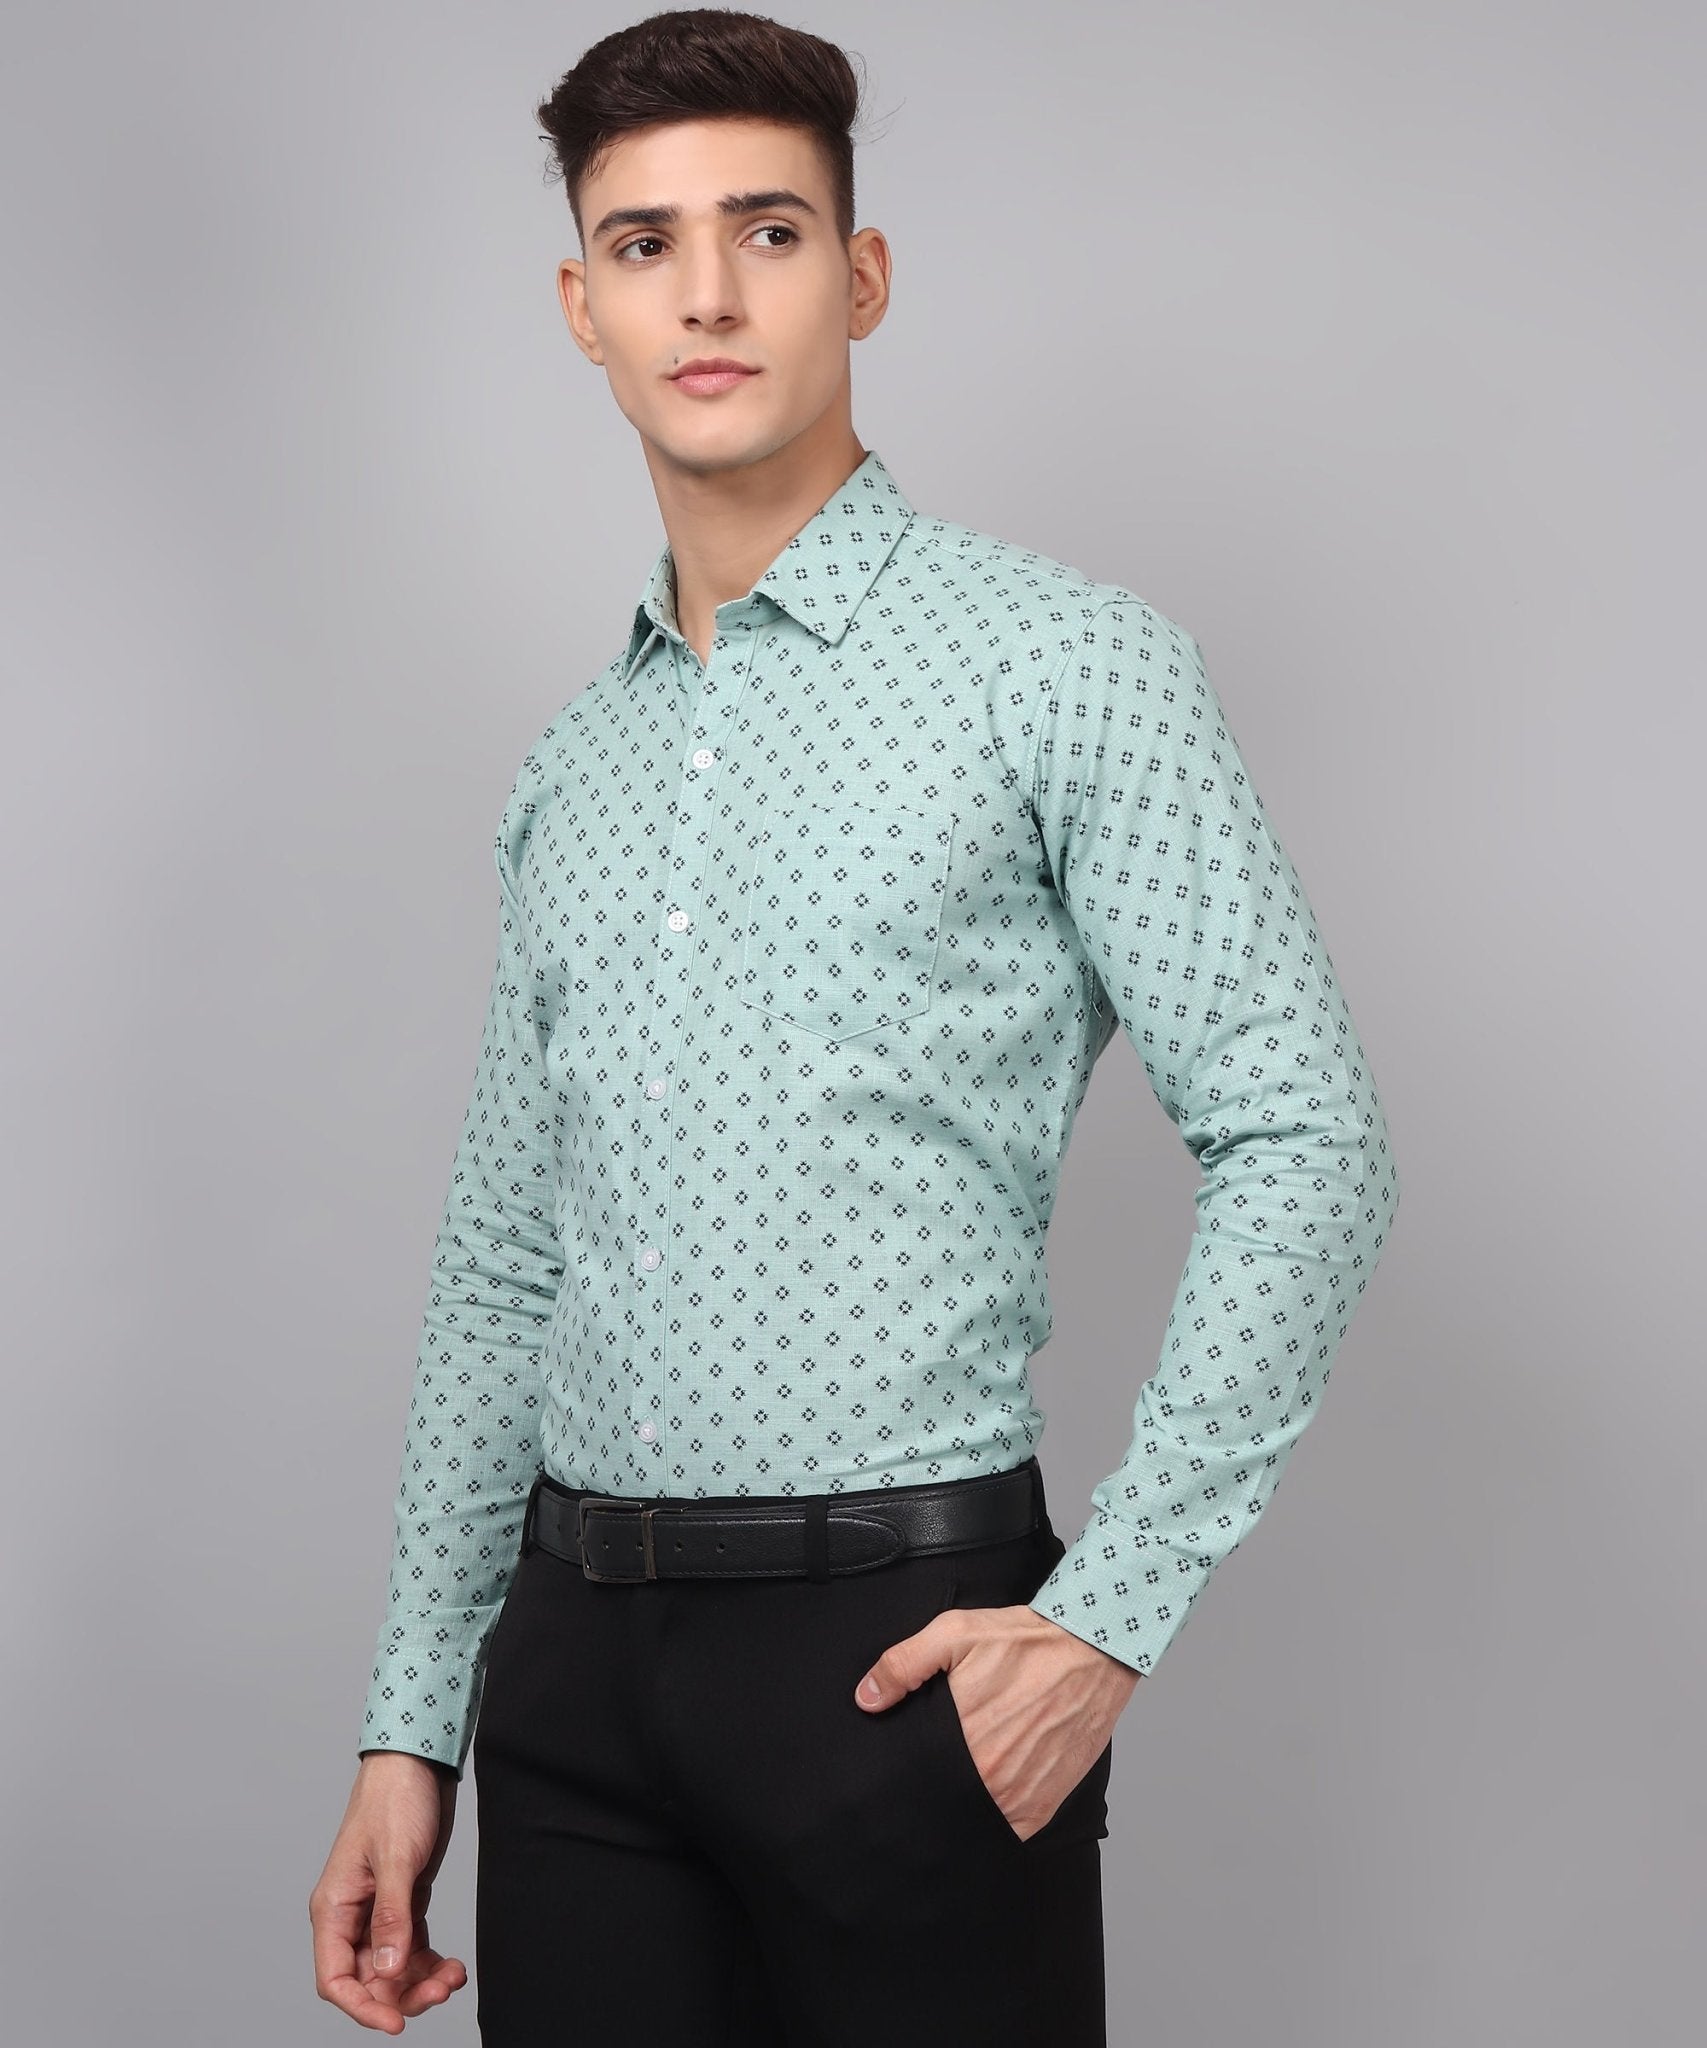 Classy TryBuy Premium Cotton Linen Printed Casual/Formal Shirt for Men - TryBuy® USA🇺🇸